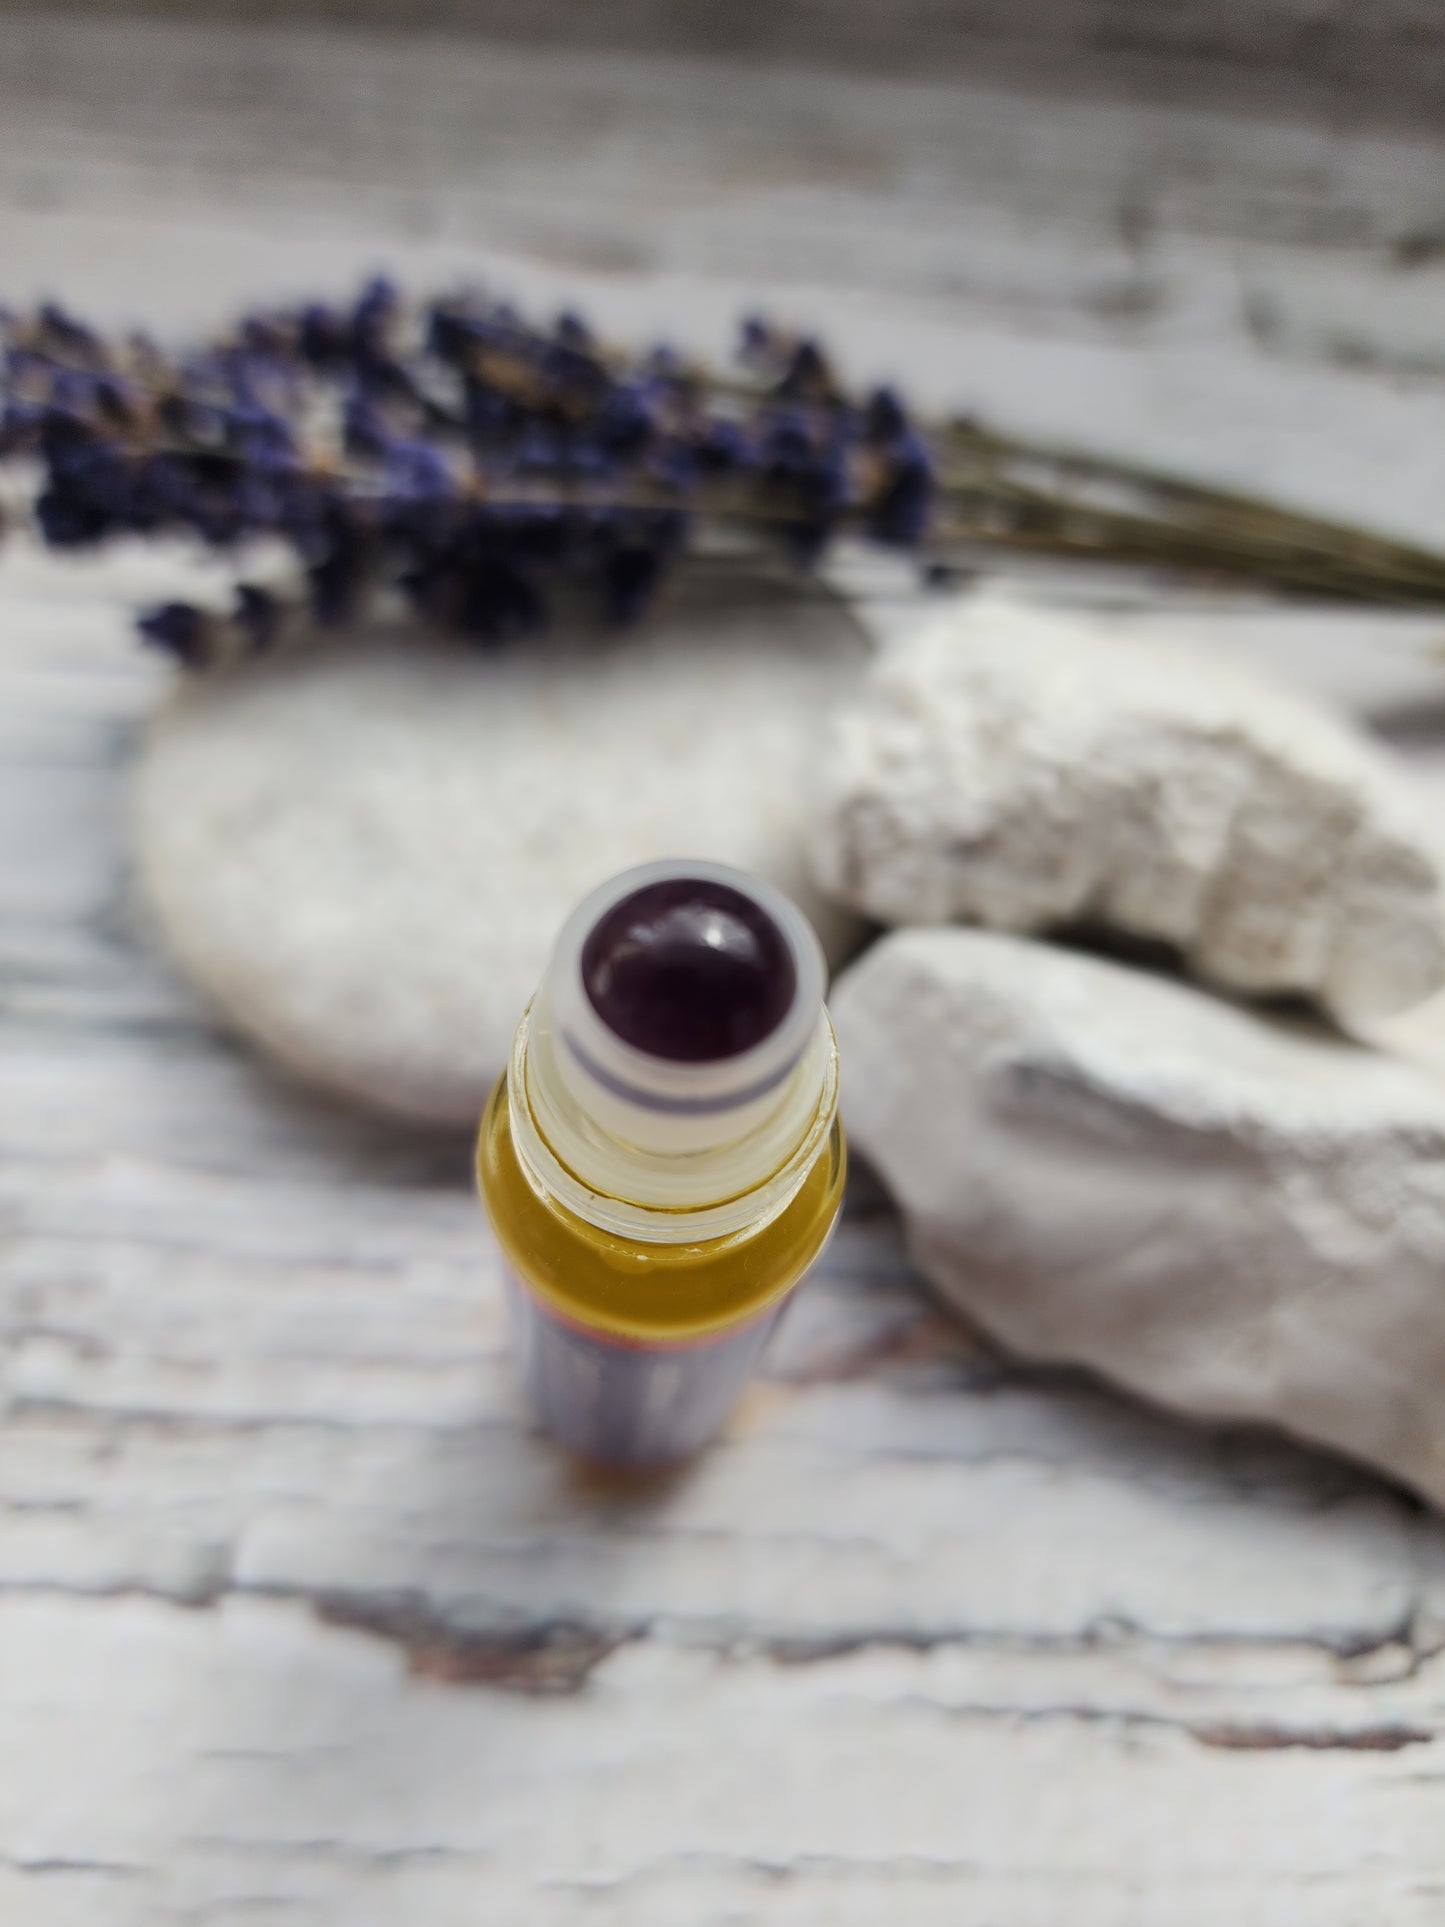 Lavender-Patchouli Essential Oil Roller with Amethyst Crystal Roller Ball